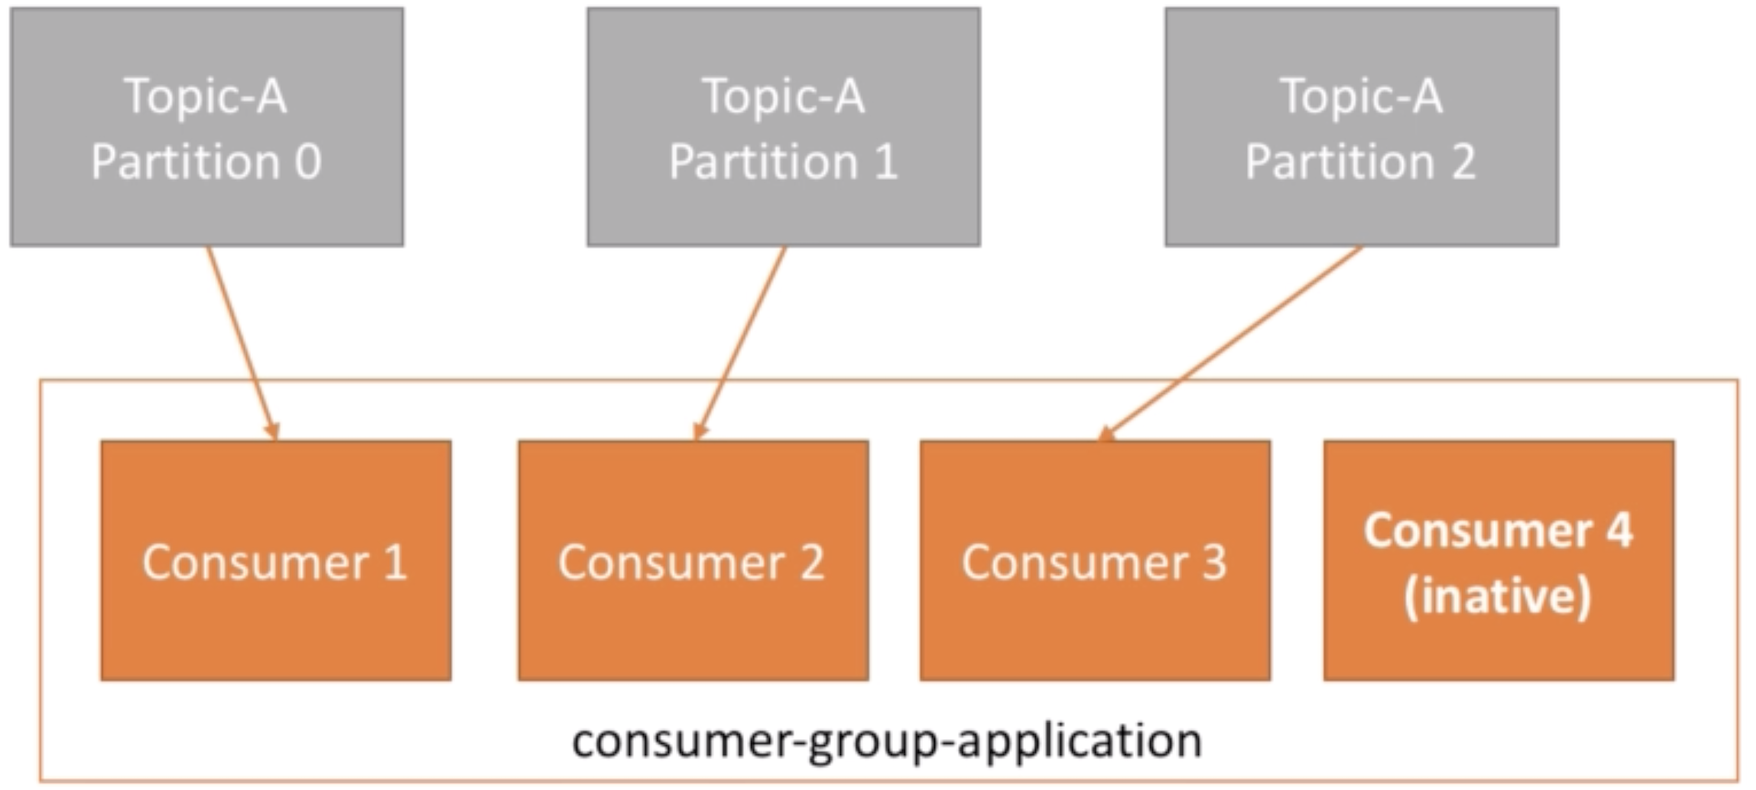 Many Consumers than Partitions